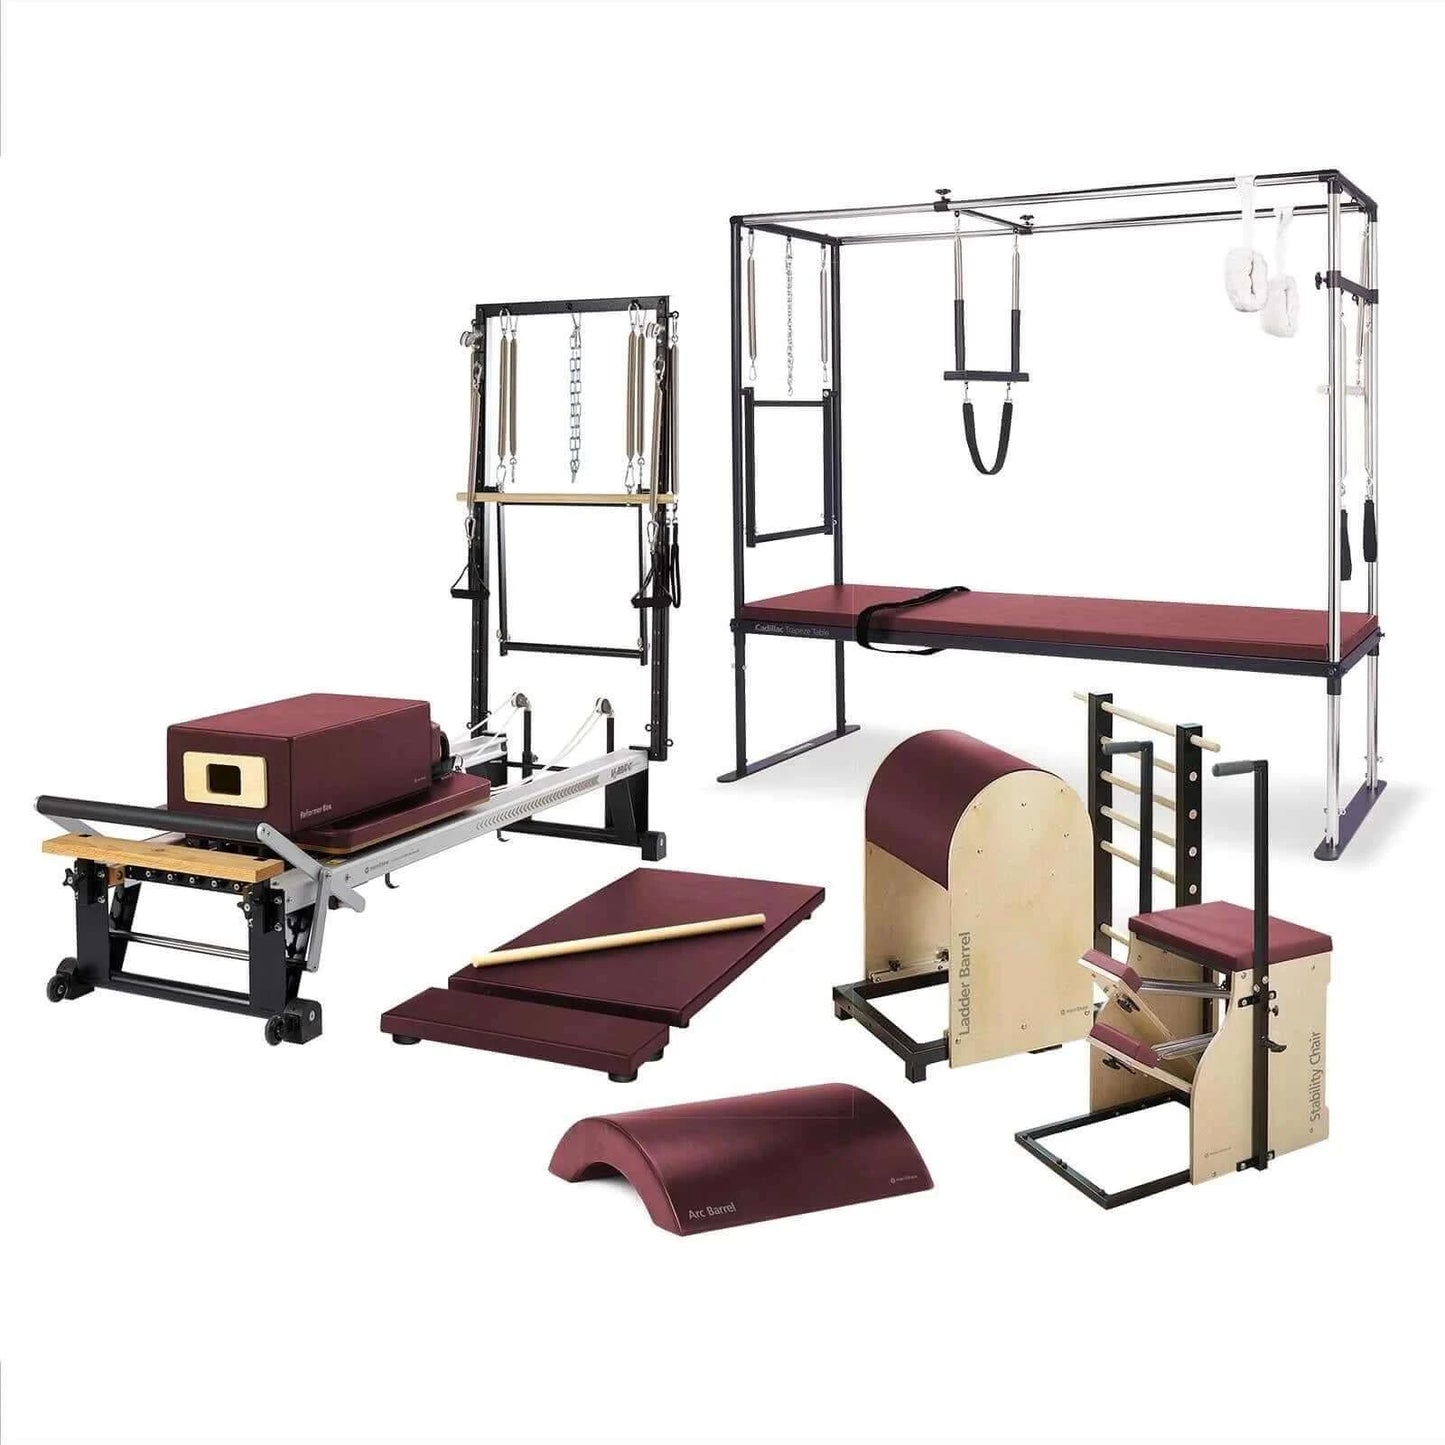 Red Truffle Merrithew™ Pilates Rehab Enhanced One-On-One Studio Bundle by Merrithew™ sold by Pilates Matters® by BSP LLC